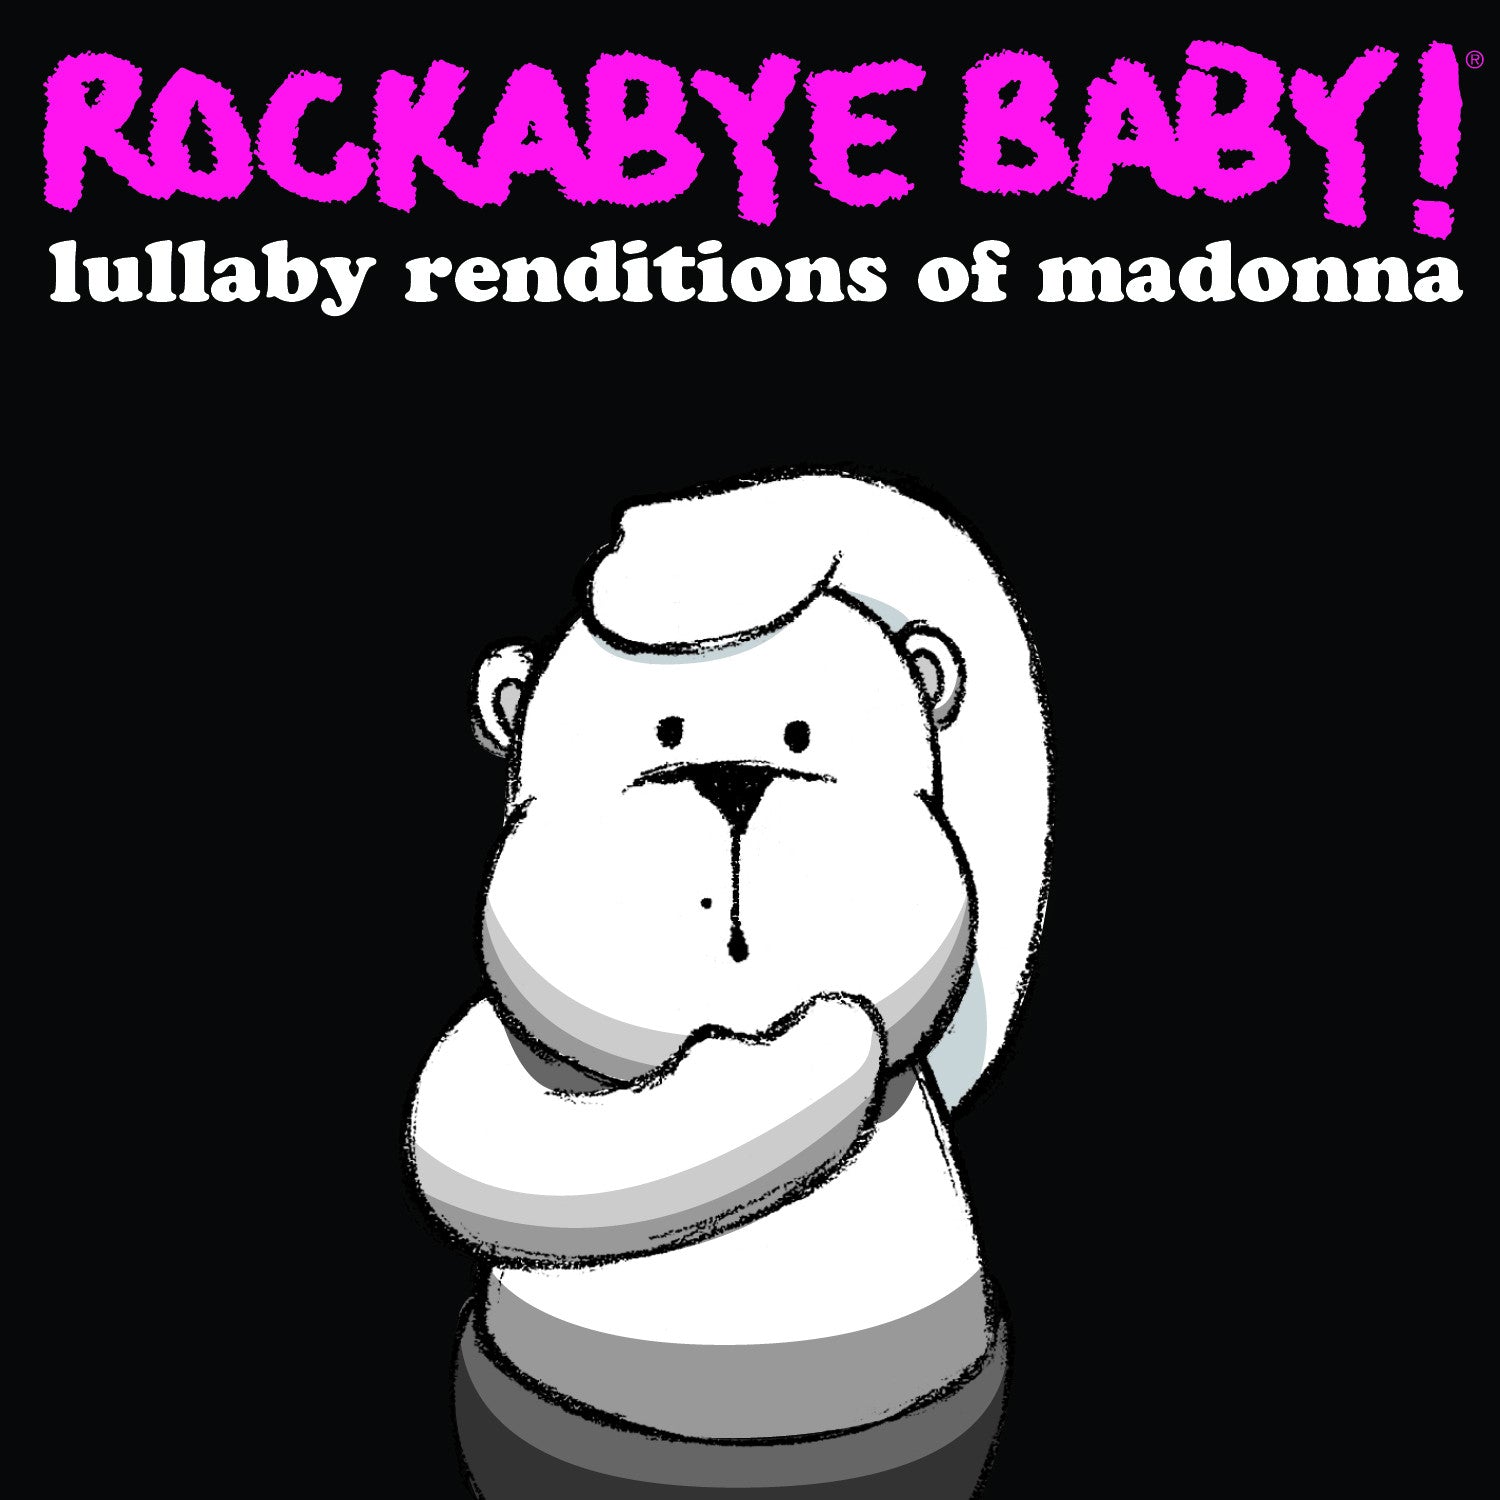 rockabye baby lullaby renditions madonna